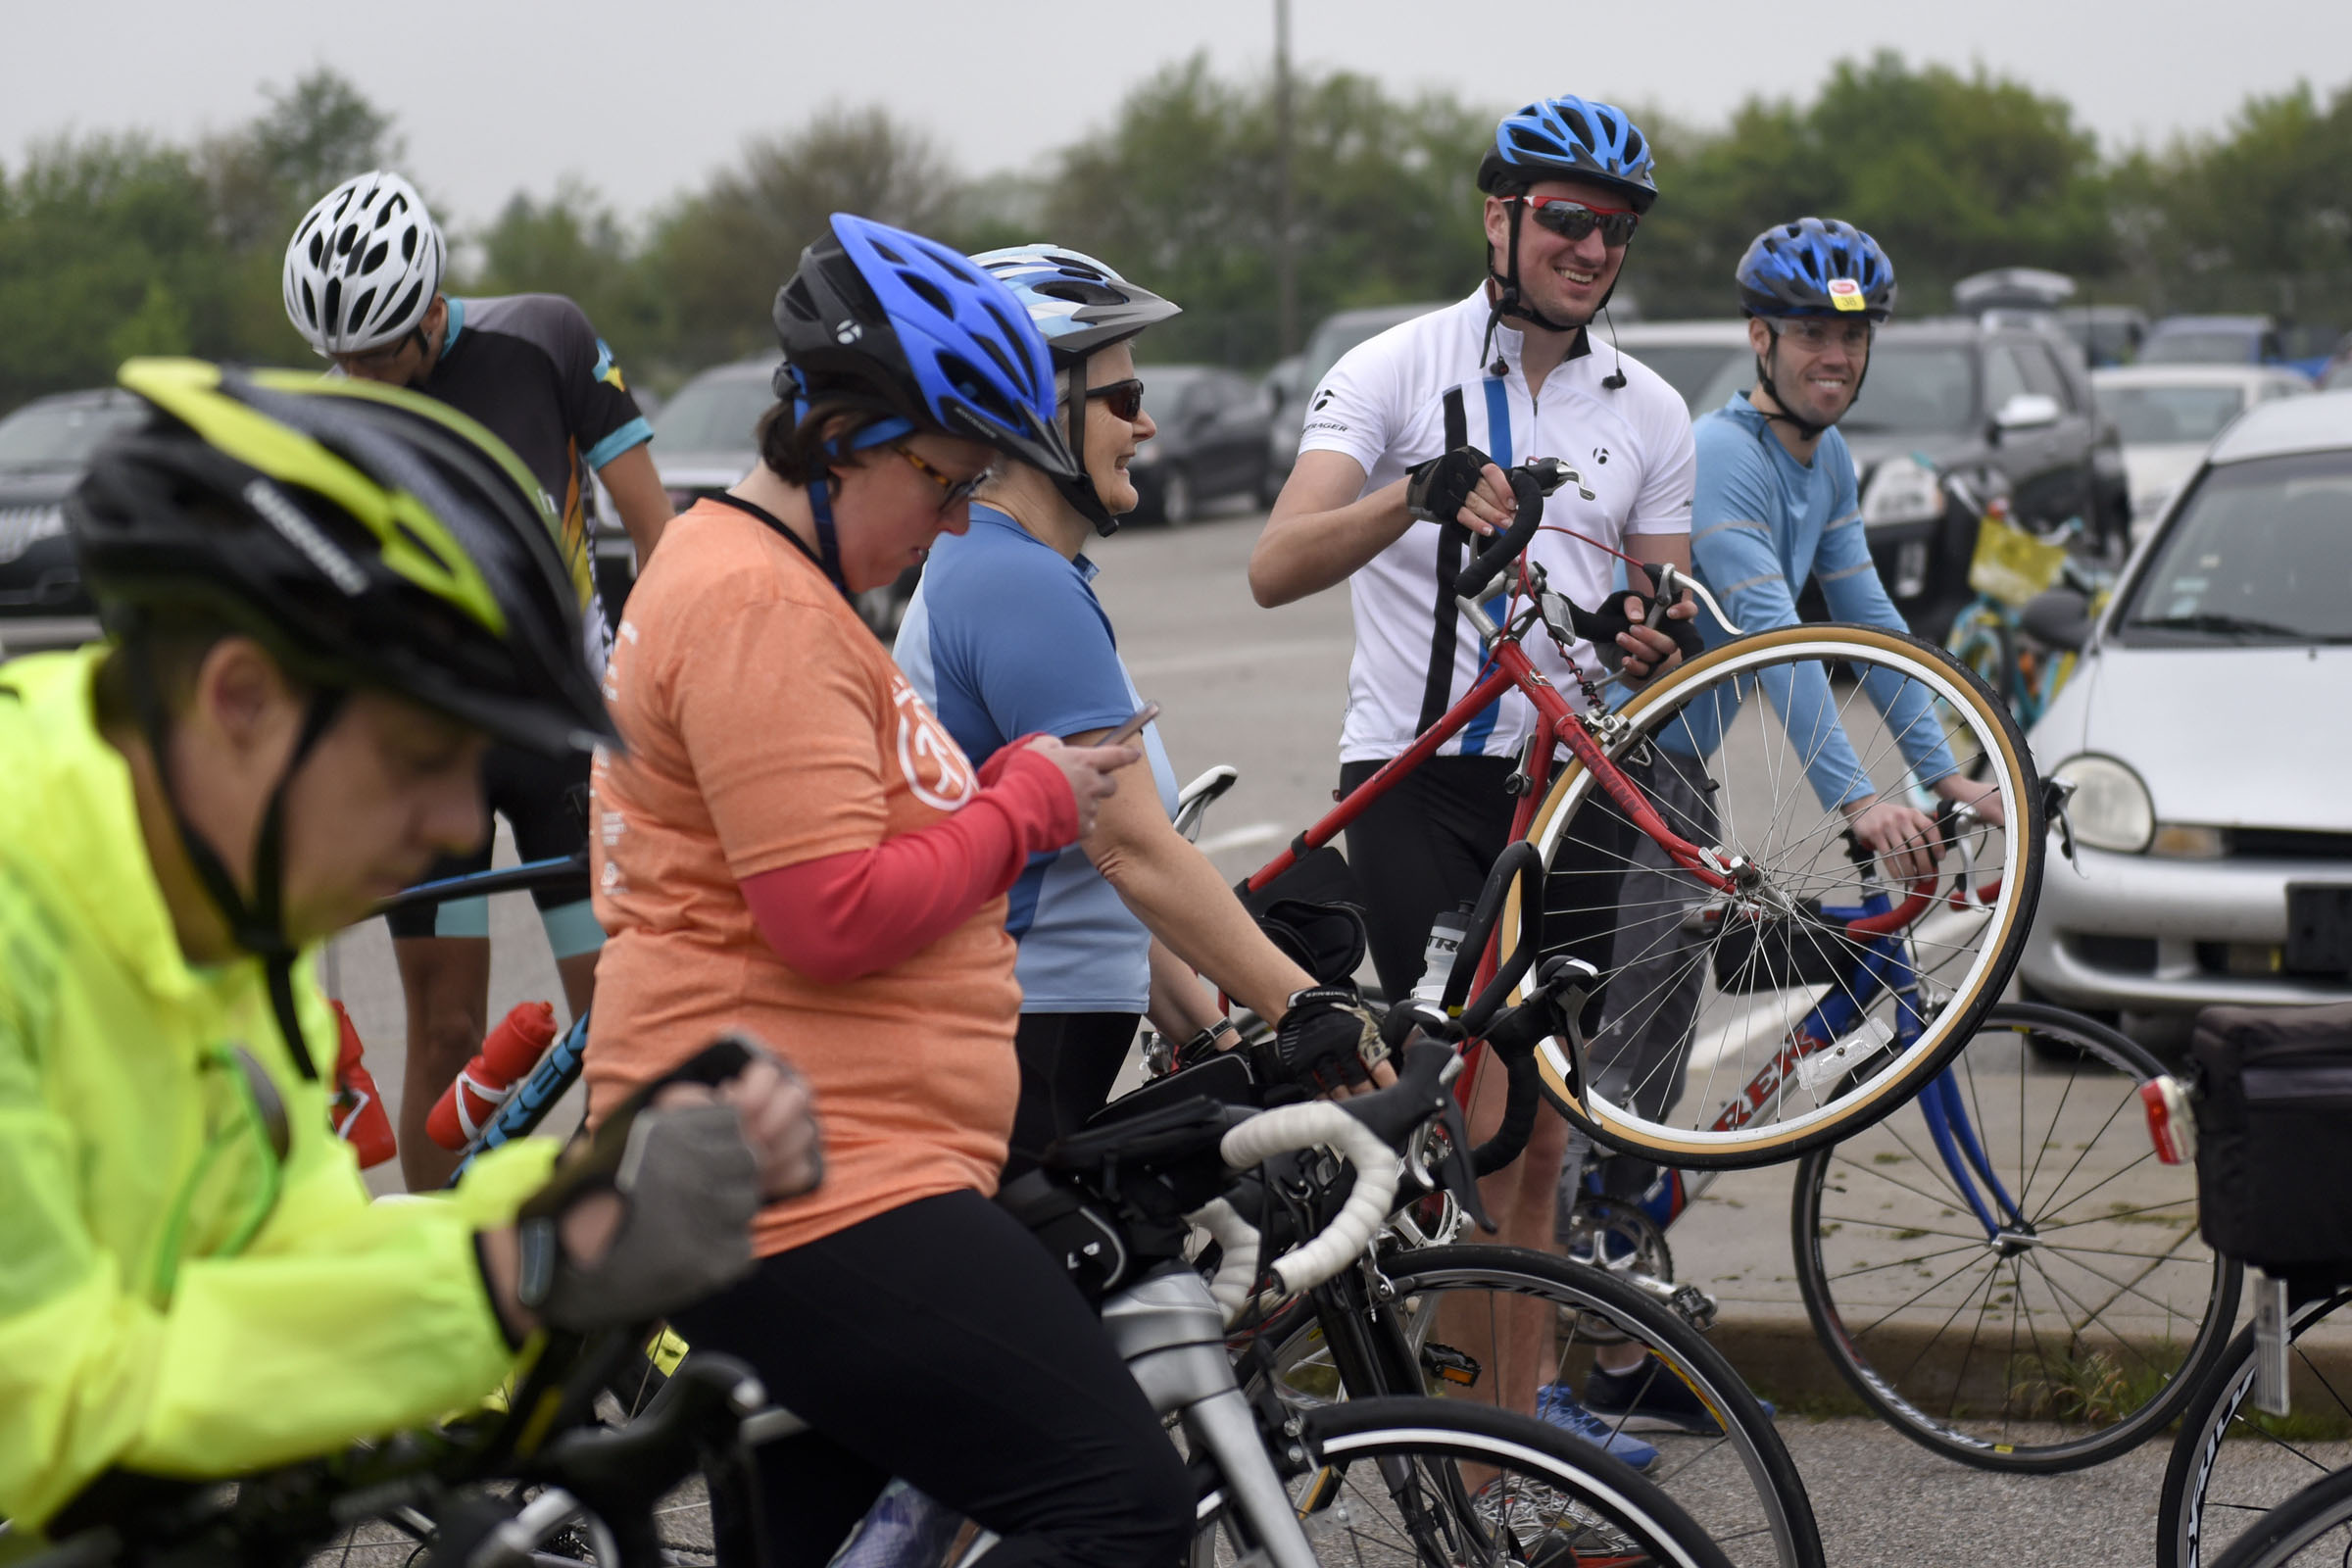 ADEC’s (Walk, Run or) Ride-A-Bike returns on May 18 for 47th year